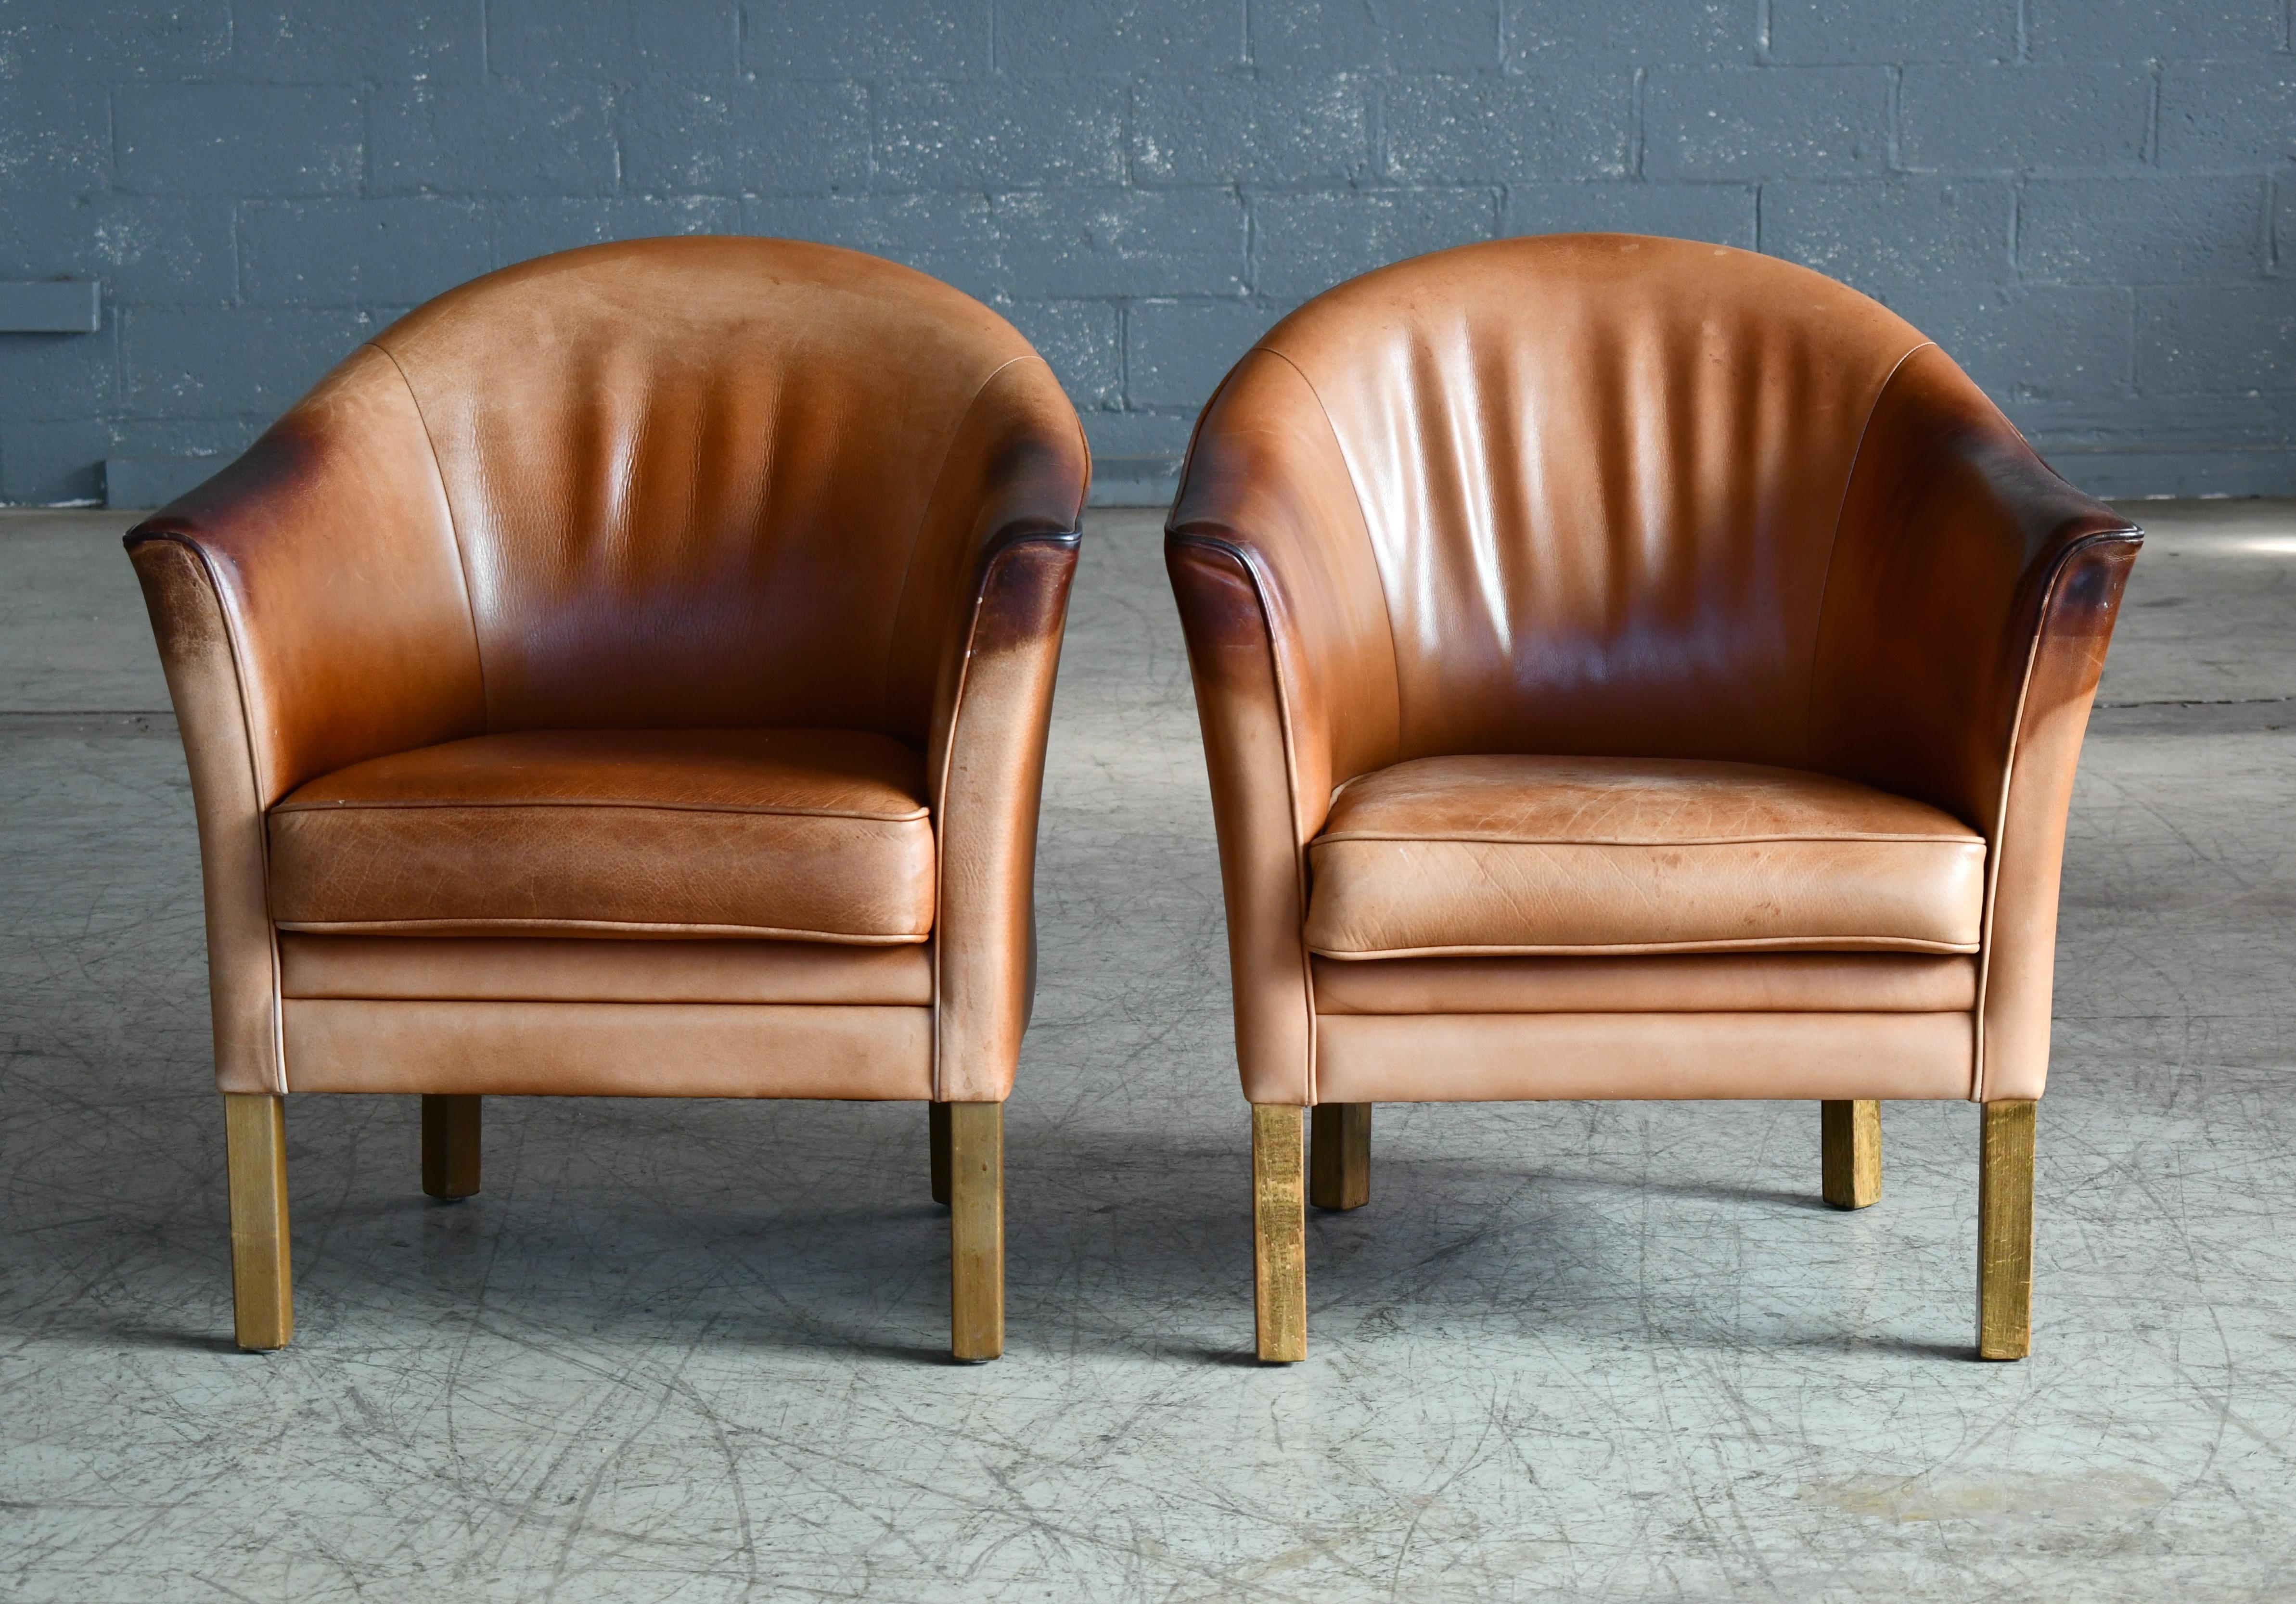 tan leather chairs